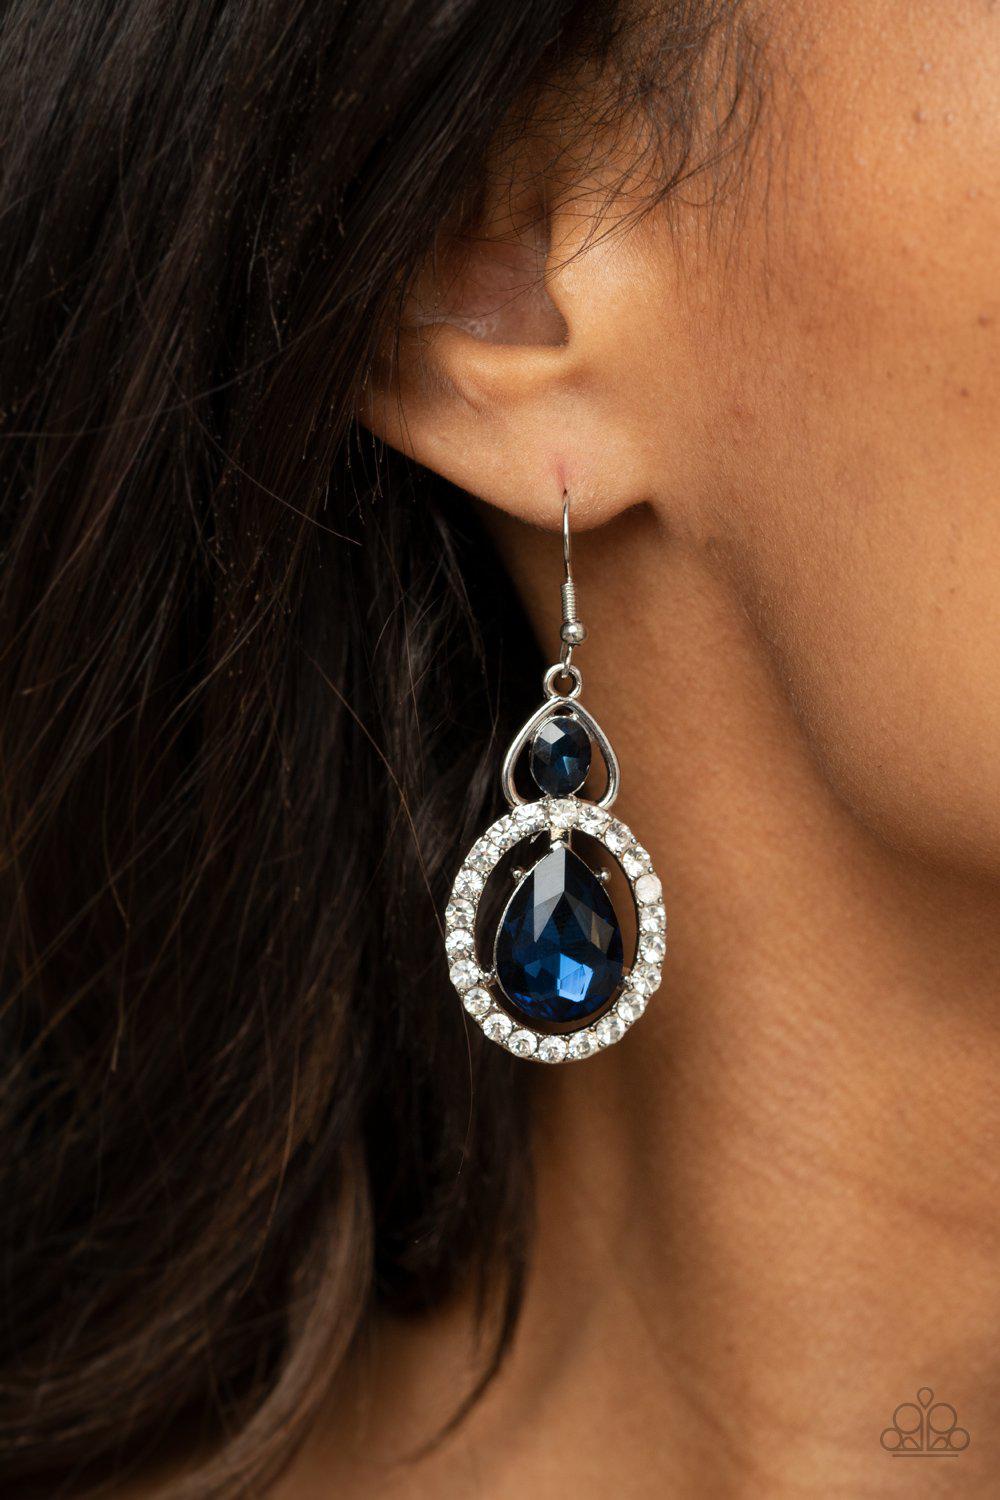 Double The Drama Blue and White Rhinestone Earrings - Paparazzi Accessories- model - CarasShop.com - $5 Jewelry by Cara Jewels